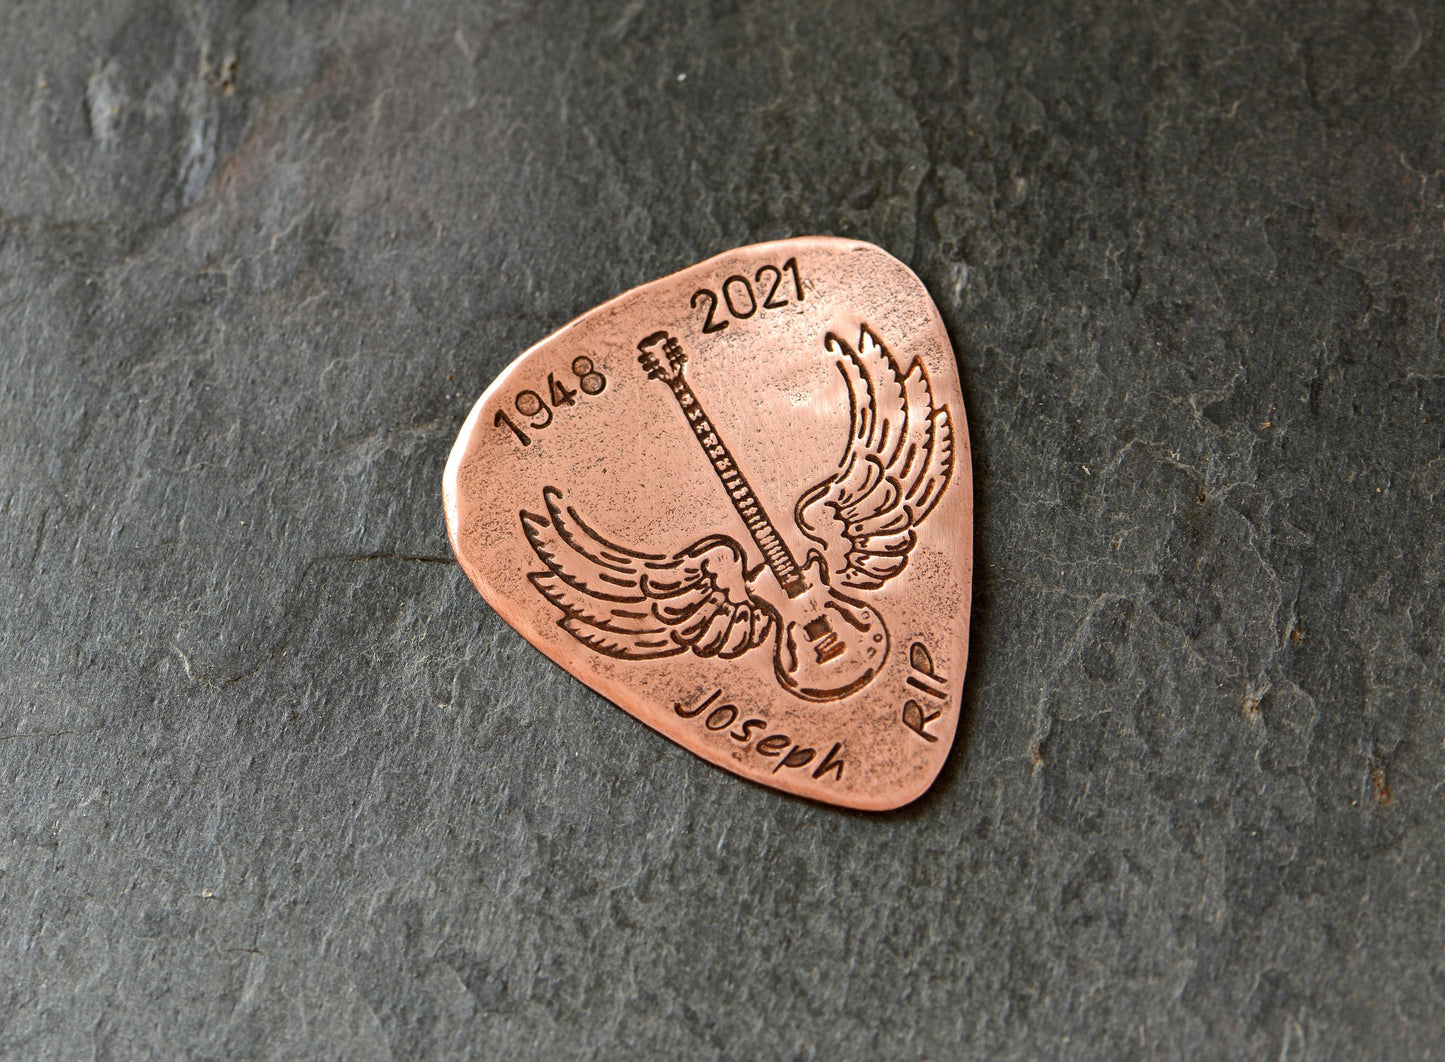 Memorial winged guitar on pick with custom date and name